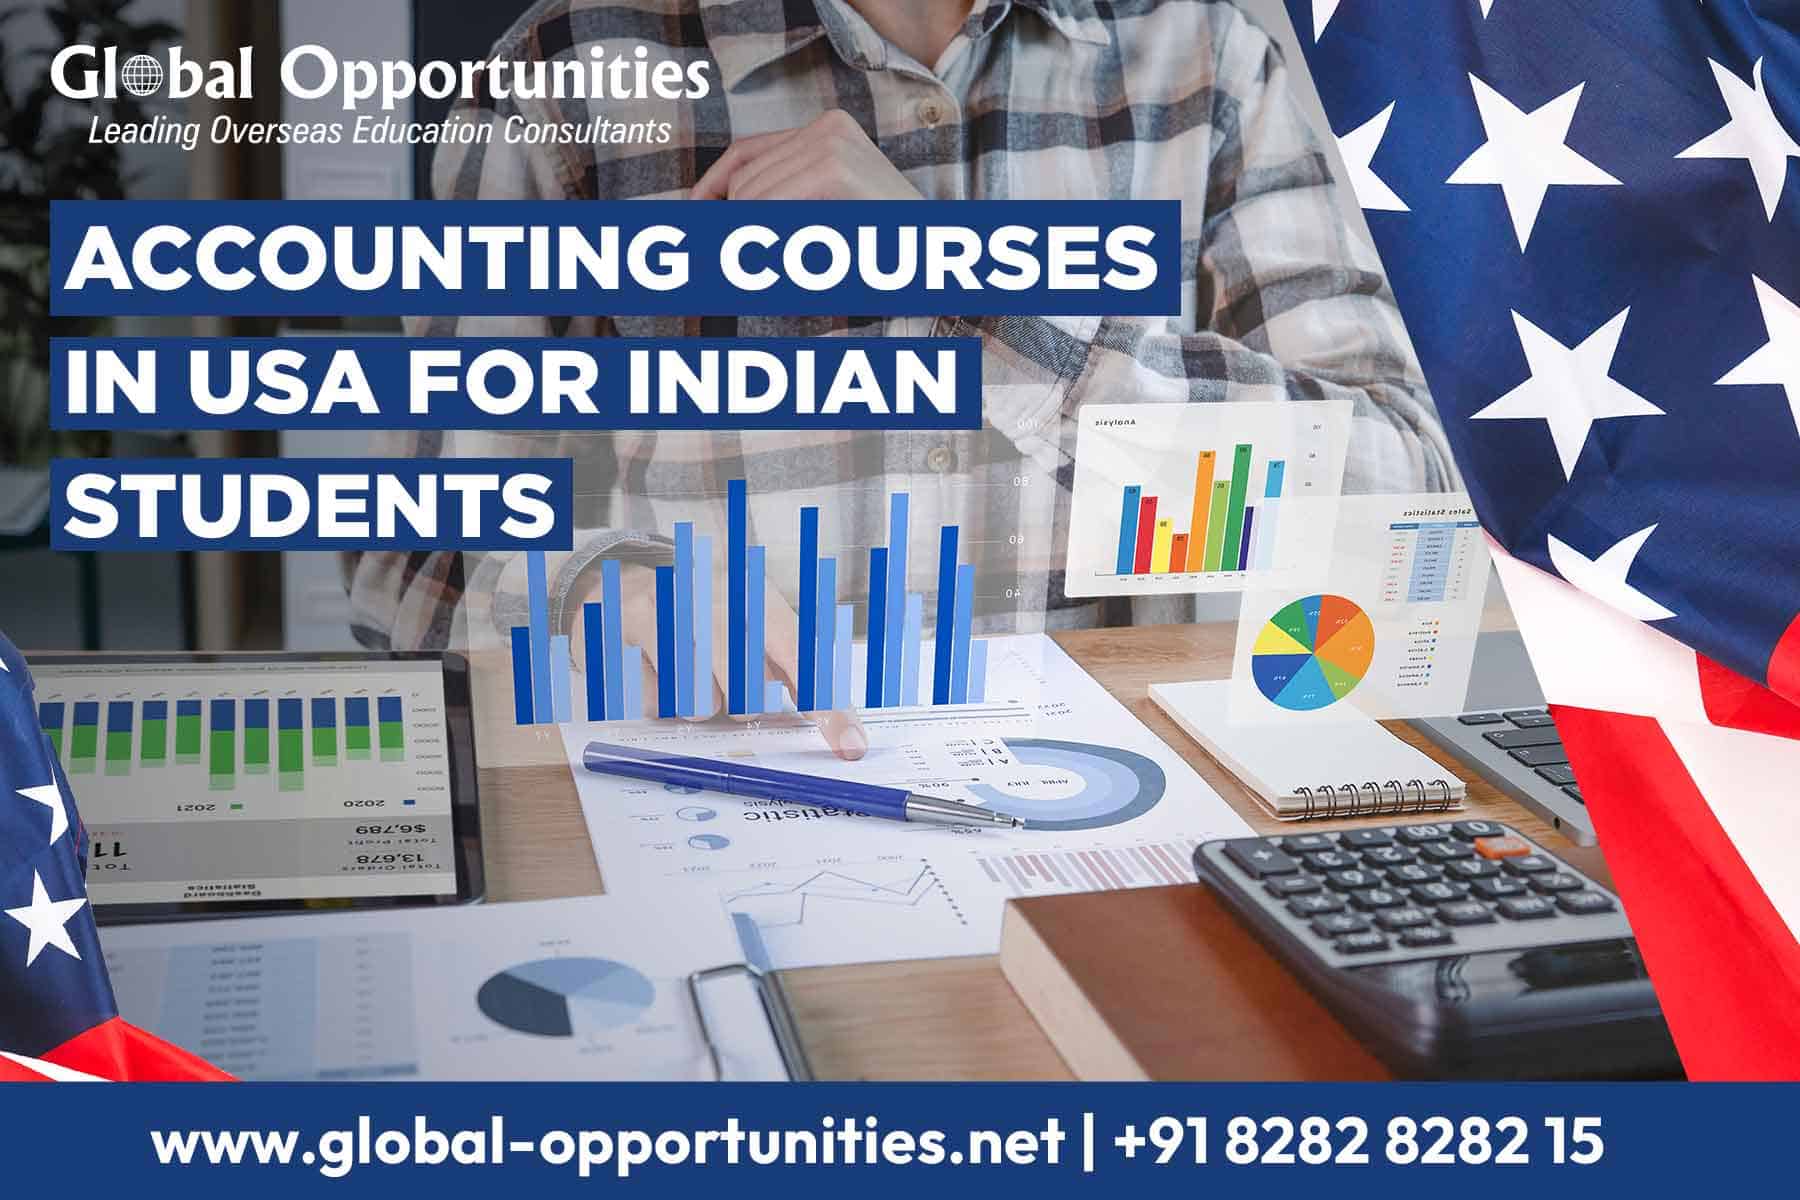 Accounting courses in USA